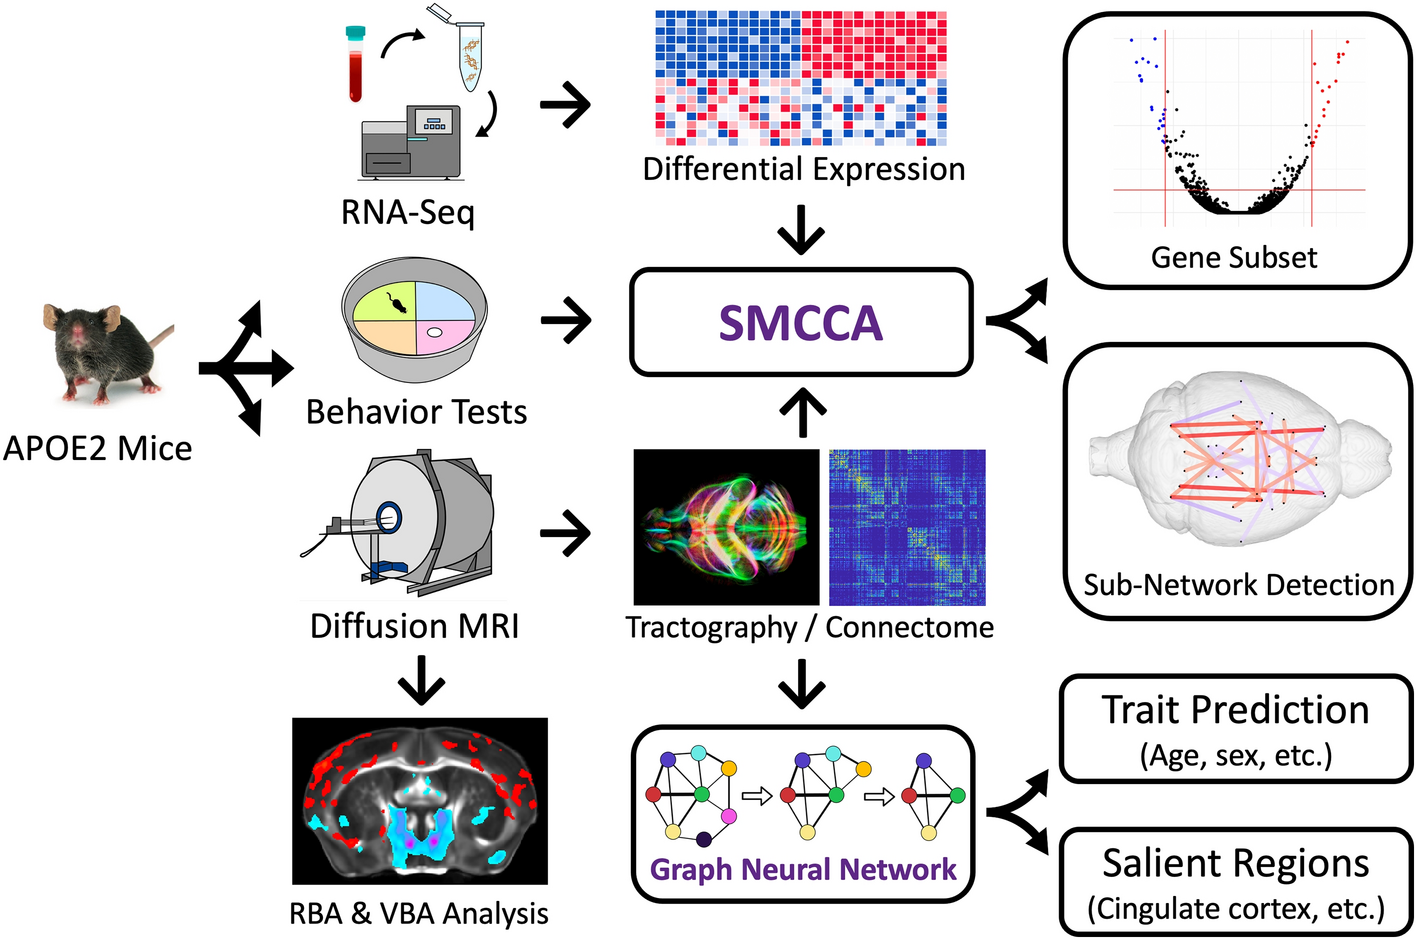 Multivariate investigation of aging in mouse models expressing the Alzheimer’s protective APOE2 allele: integrating cognitive metrics, brain imaging, and blood transcriptomics